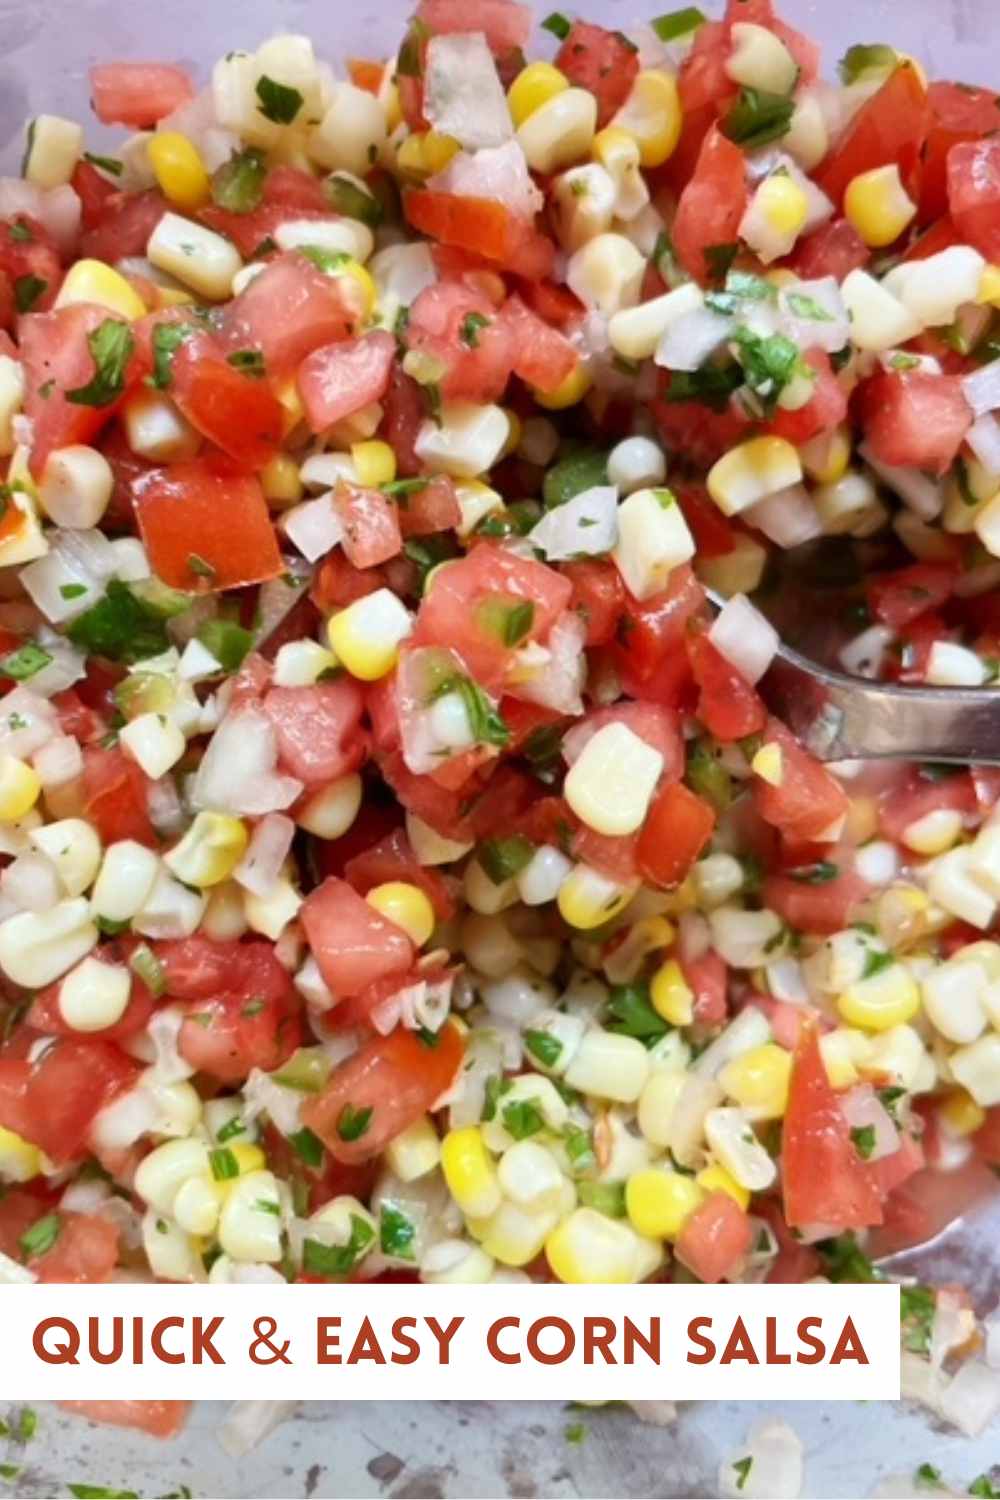 This quick and easy corn salsa recipe is great for serving with grilled chicken, for using as a taco topping, or for using as a tortilla chip dip!